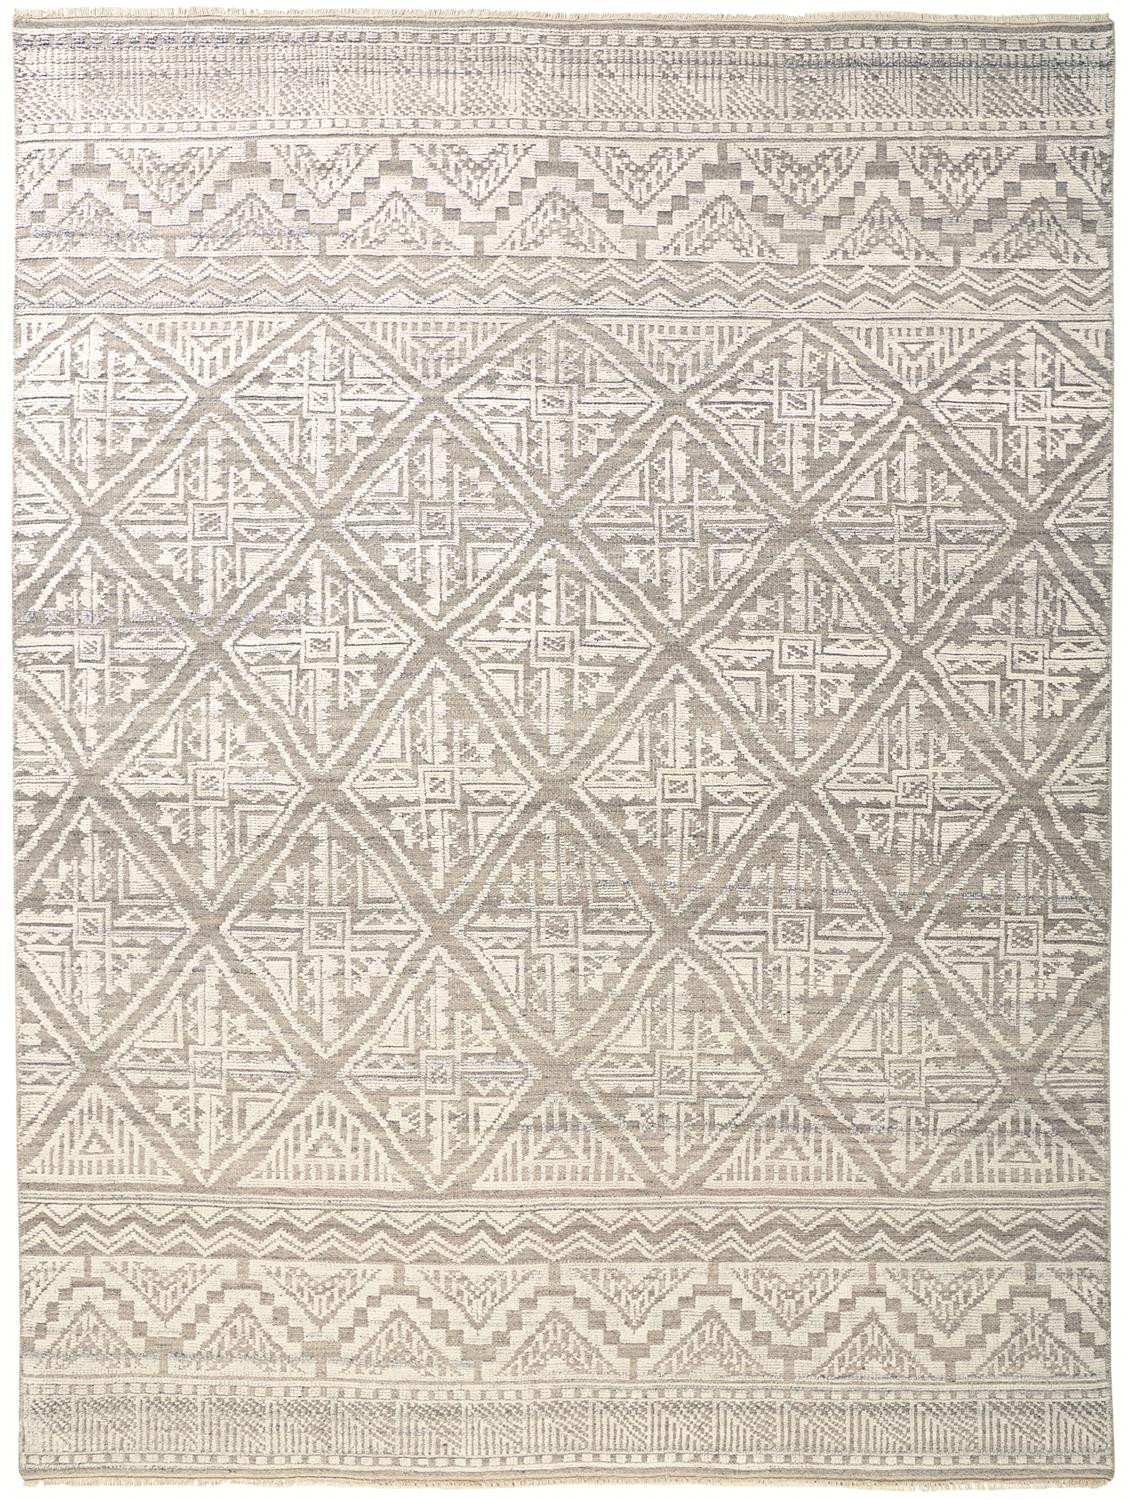 8' X 10' Ivory Tan And Gray Geometric Hand Knotted Area Rug-512582-1